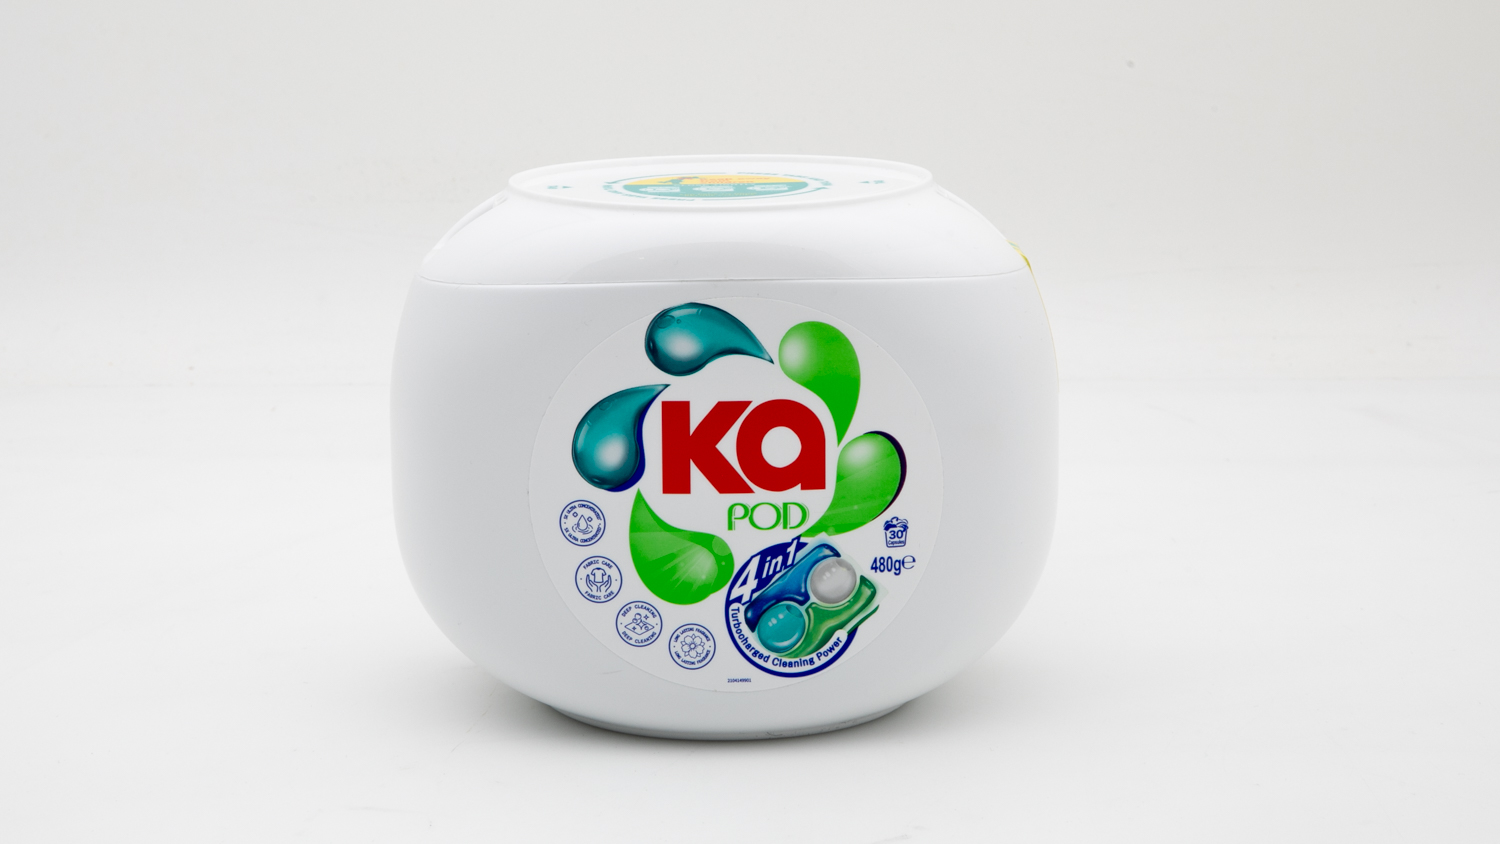 Ka Pod 4 in 1 Turbocharged Cleaning Power 30 Capsules 480g Top Loader carousel image